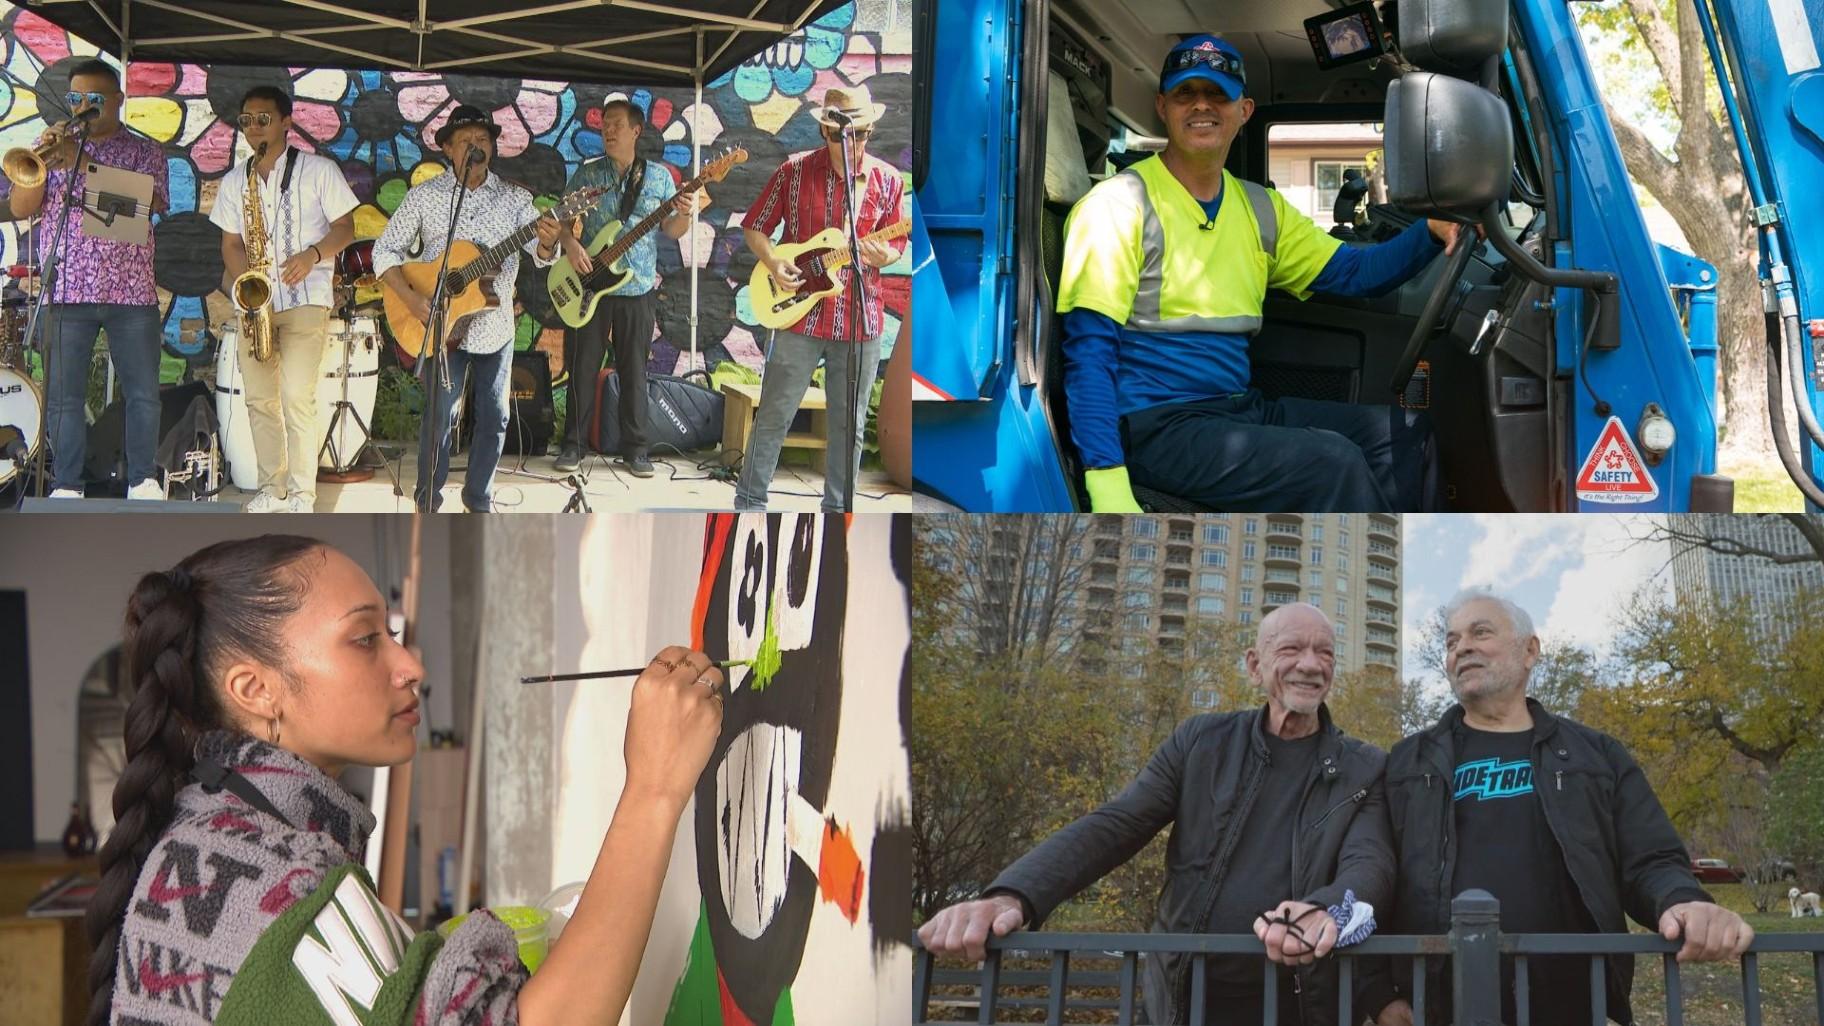 Top left: Radio Free Honduras plays in Little Village. (WTTW News) Top right: Felix Martinez was named residential sanitation driver of the year. (Michael Izquierdo / WTTW News) Bottom left: Artist Mia Lee. (WTTW News) Bottom right: Art Johnston and Pepe Peña in the documentary “Art and Pep.” (Provided)